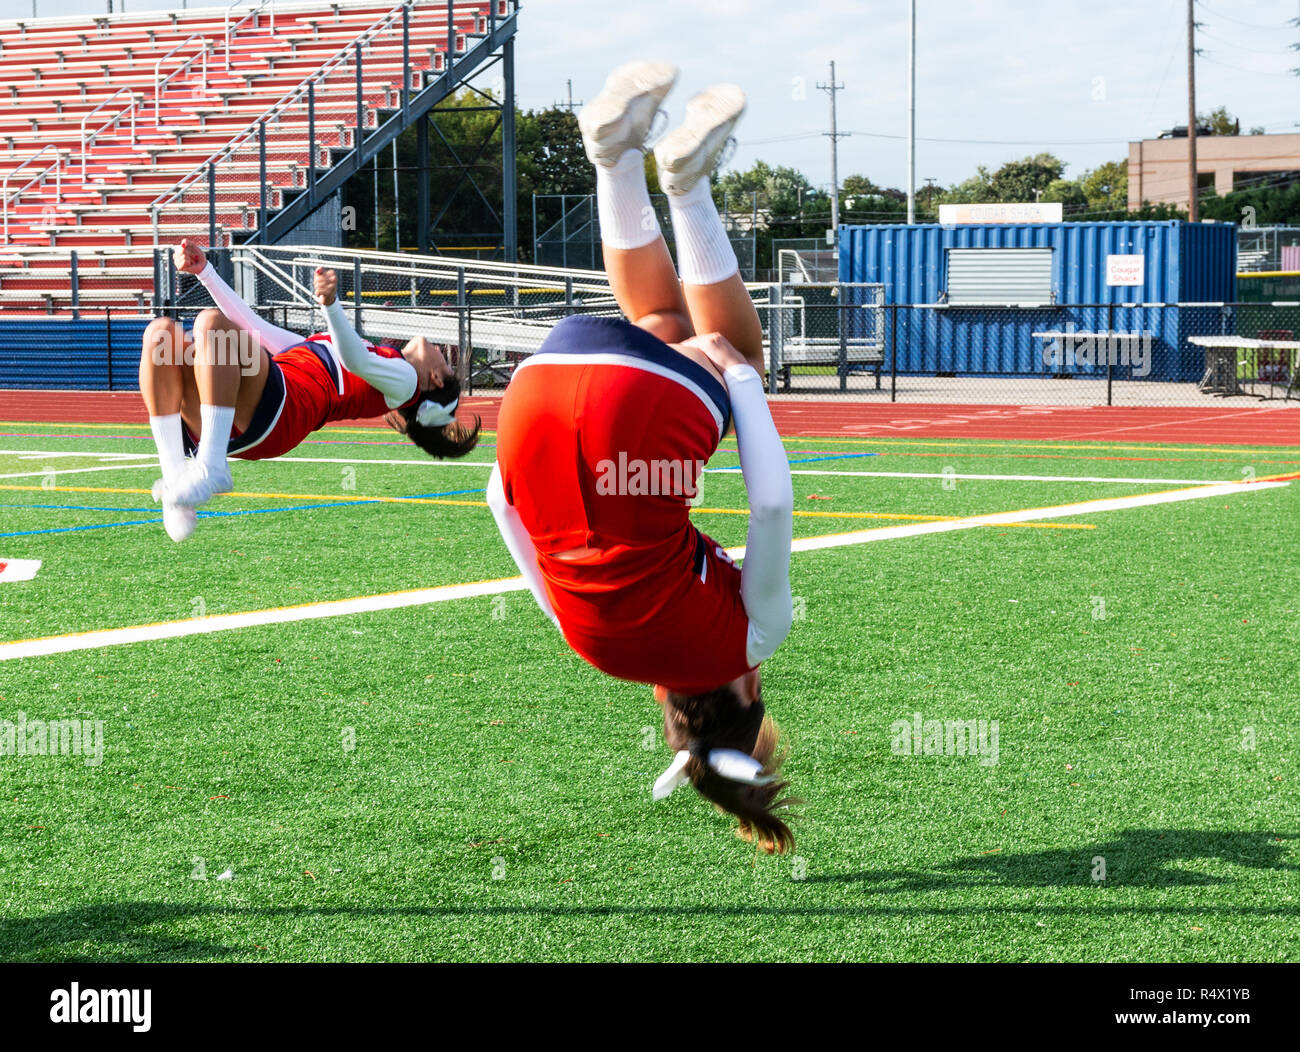 Two high school cheerleaders are practicing flips on the infield before a football game. Stock Photo